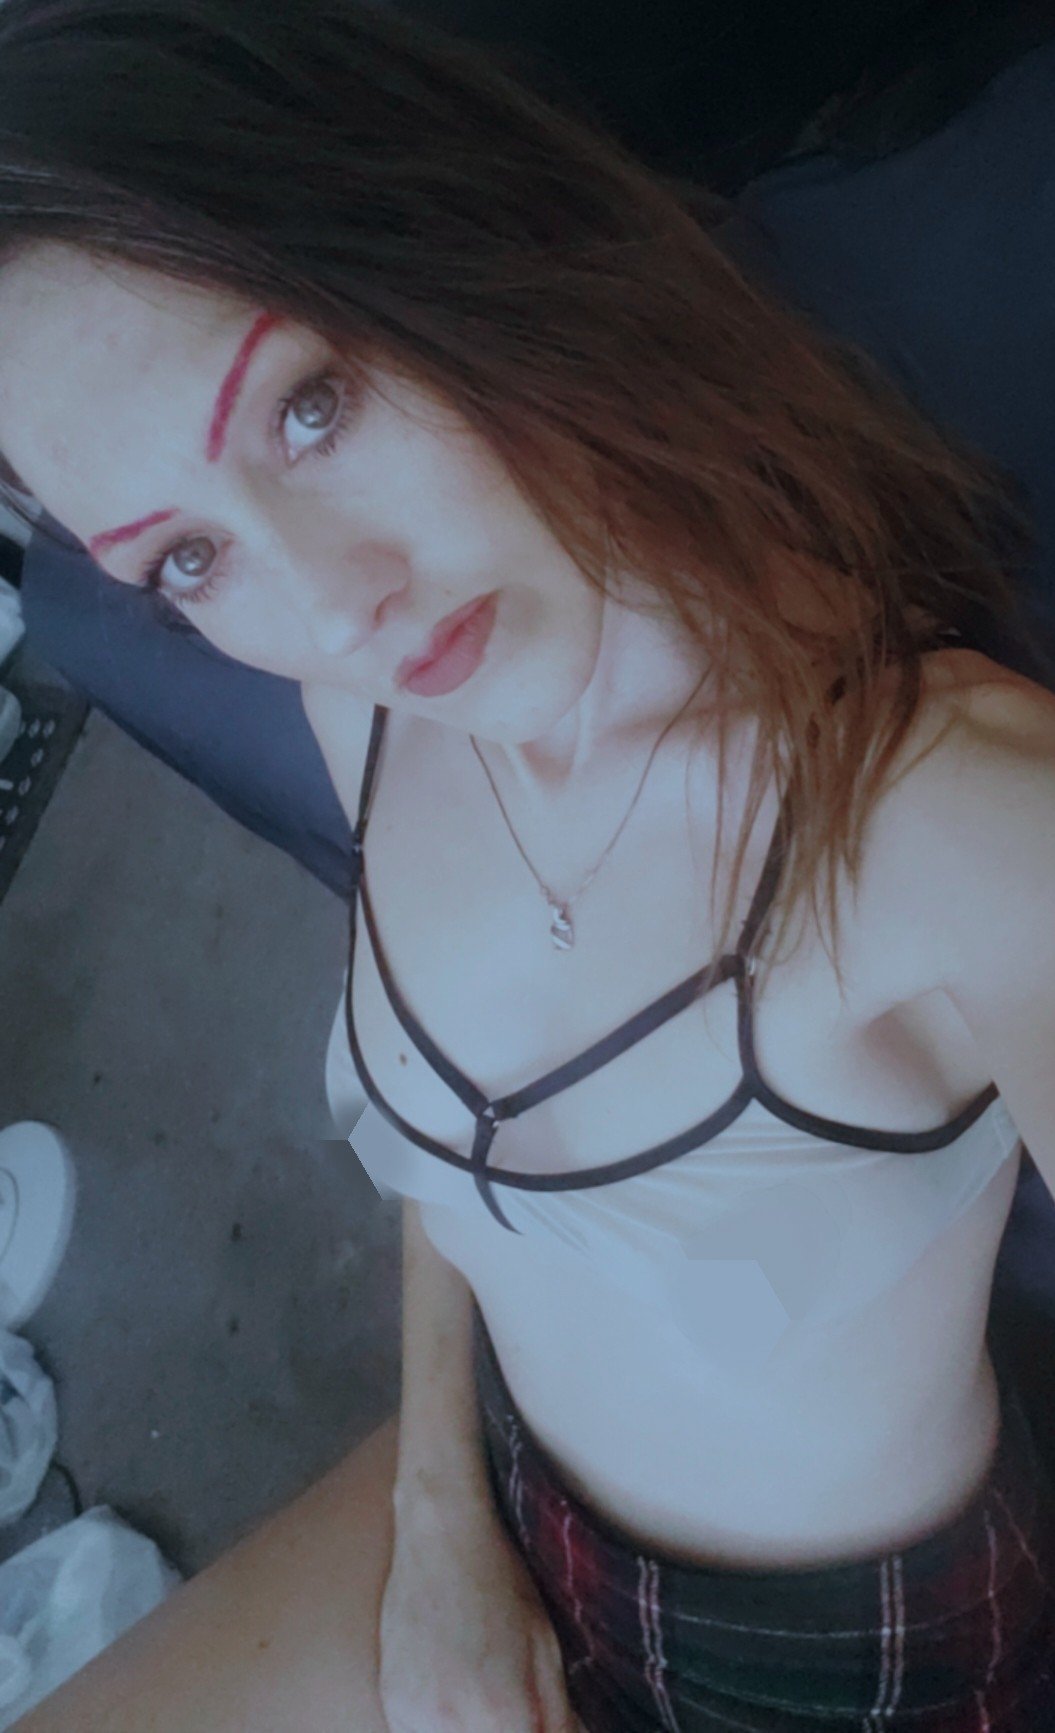 Photo by tylynn knixxon with the username @tylynnknixxon, who is a verified user,  September 30, 2020 at 11:11 AM. The post is about the topic blow clouds and the text says 'chaturbate: tylynn_knixxon
#chaturbate #cloudy #spun #waxplay #wax #makeup #longlegs #kneehighs #amateur #bigtits #camgirl'